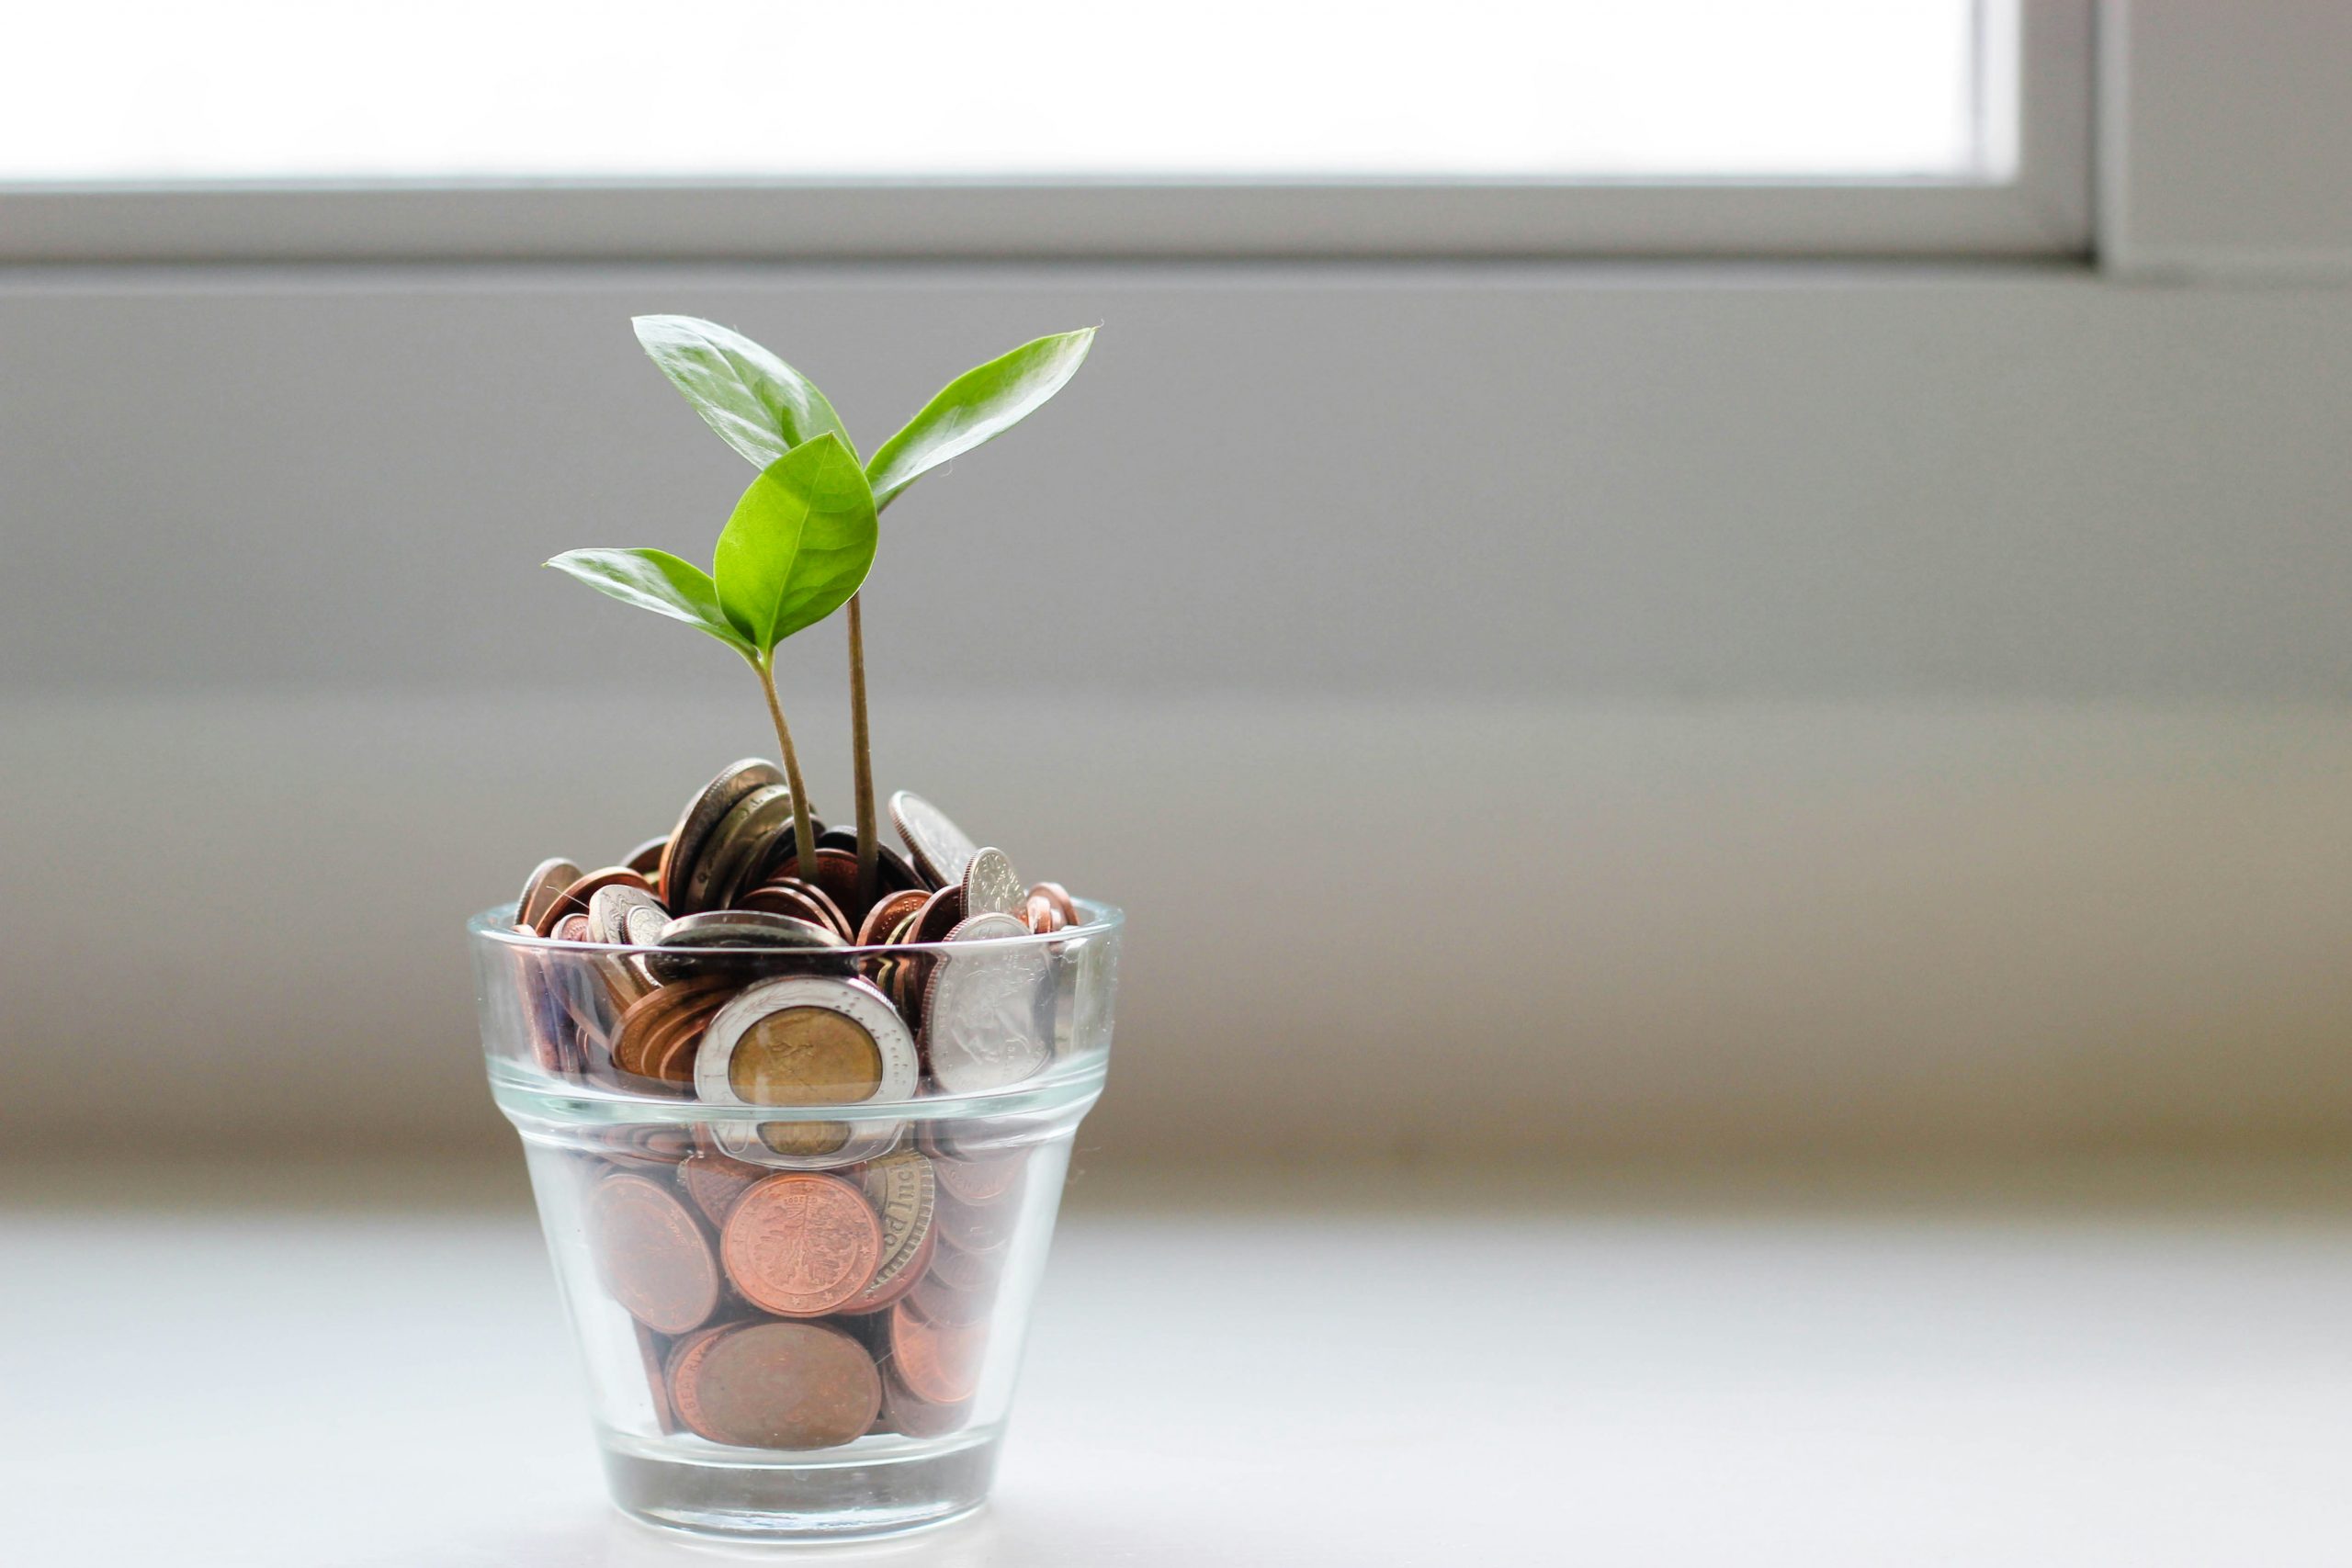 A small, clear, glass planter filled with coins. There are two seedlings growing.